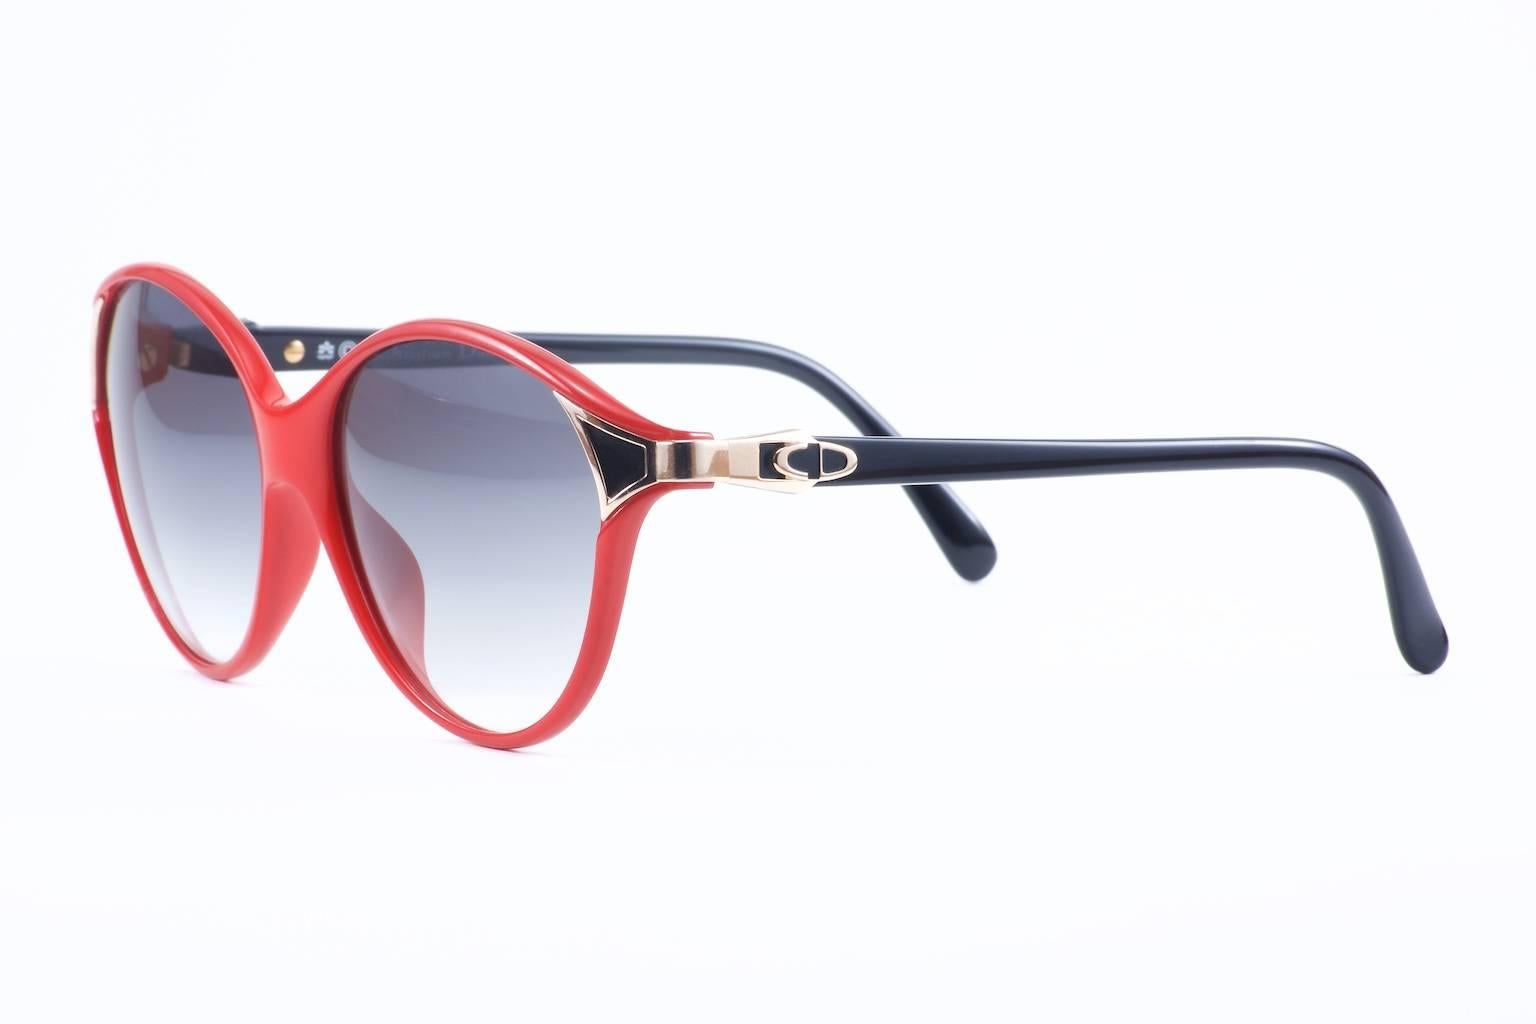 The Neiman Marcus curated eyewear collection features one-of-a-kind, never-worn, original vintage pieces from the early ’80s to the mid ’90s with their original vintage cases. Many of the pieces are handmade or produced only in Europe with the